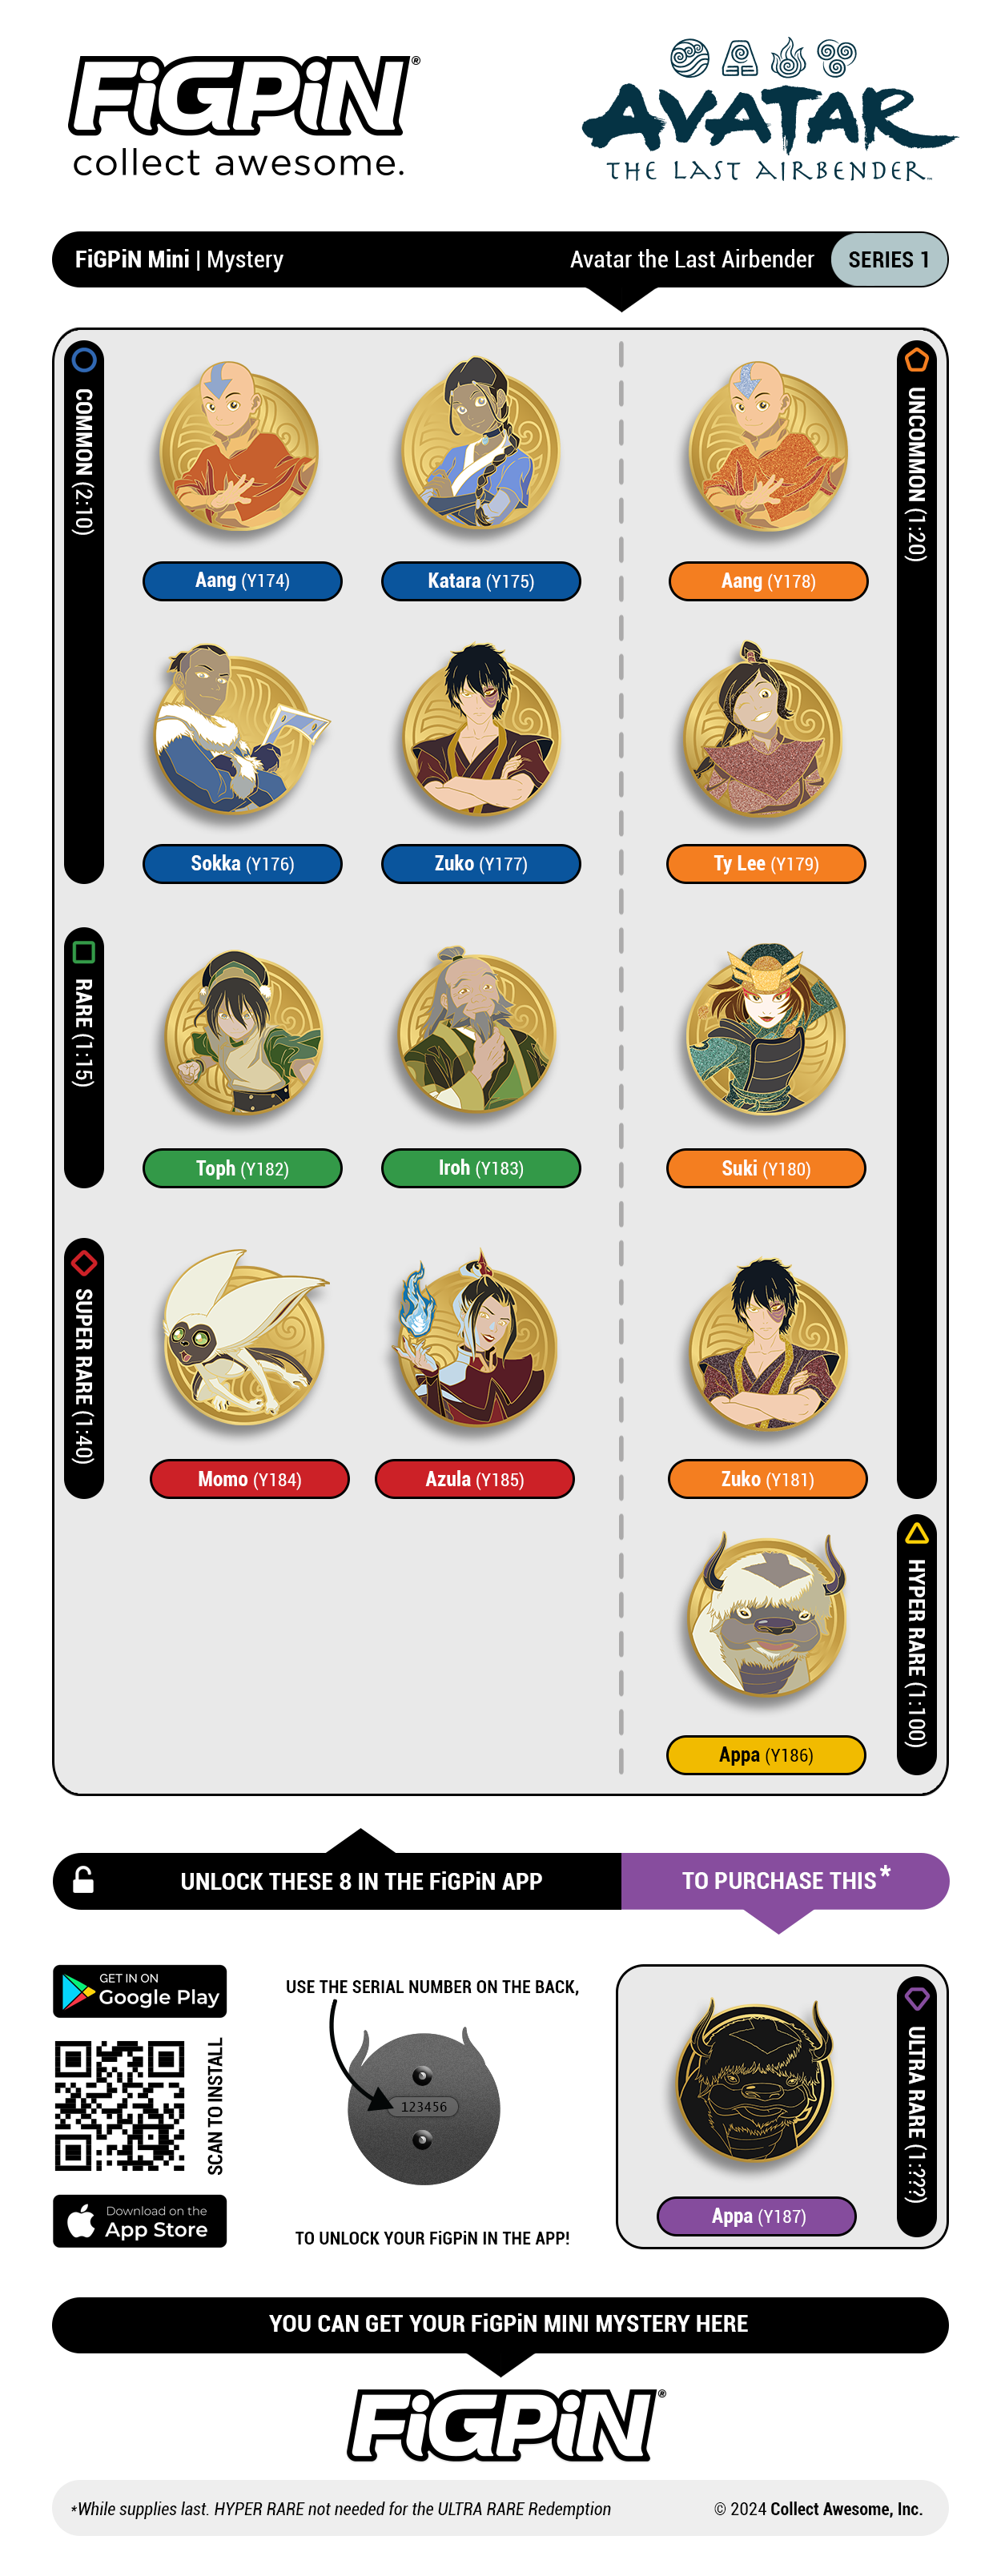 Rarity Sheet breaking down Avatar: The Last Airbender Mystery Minis collectibility. Sheet contains item numbers, rarities per character, and how to unlock on the FiGPiN APP